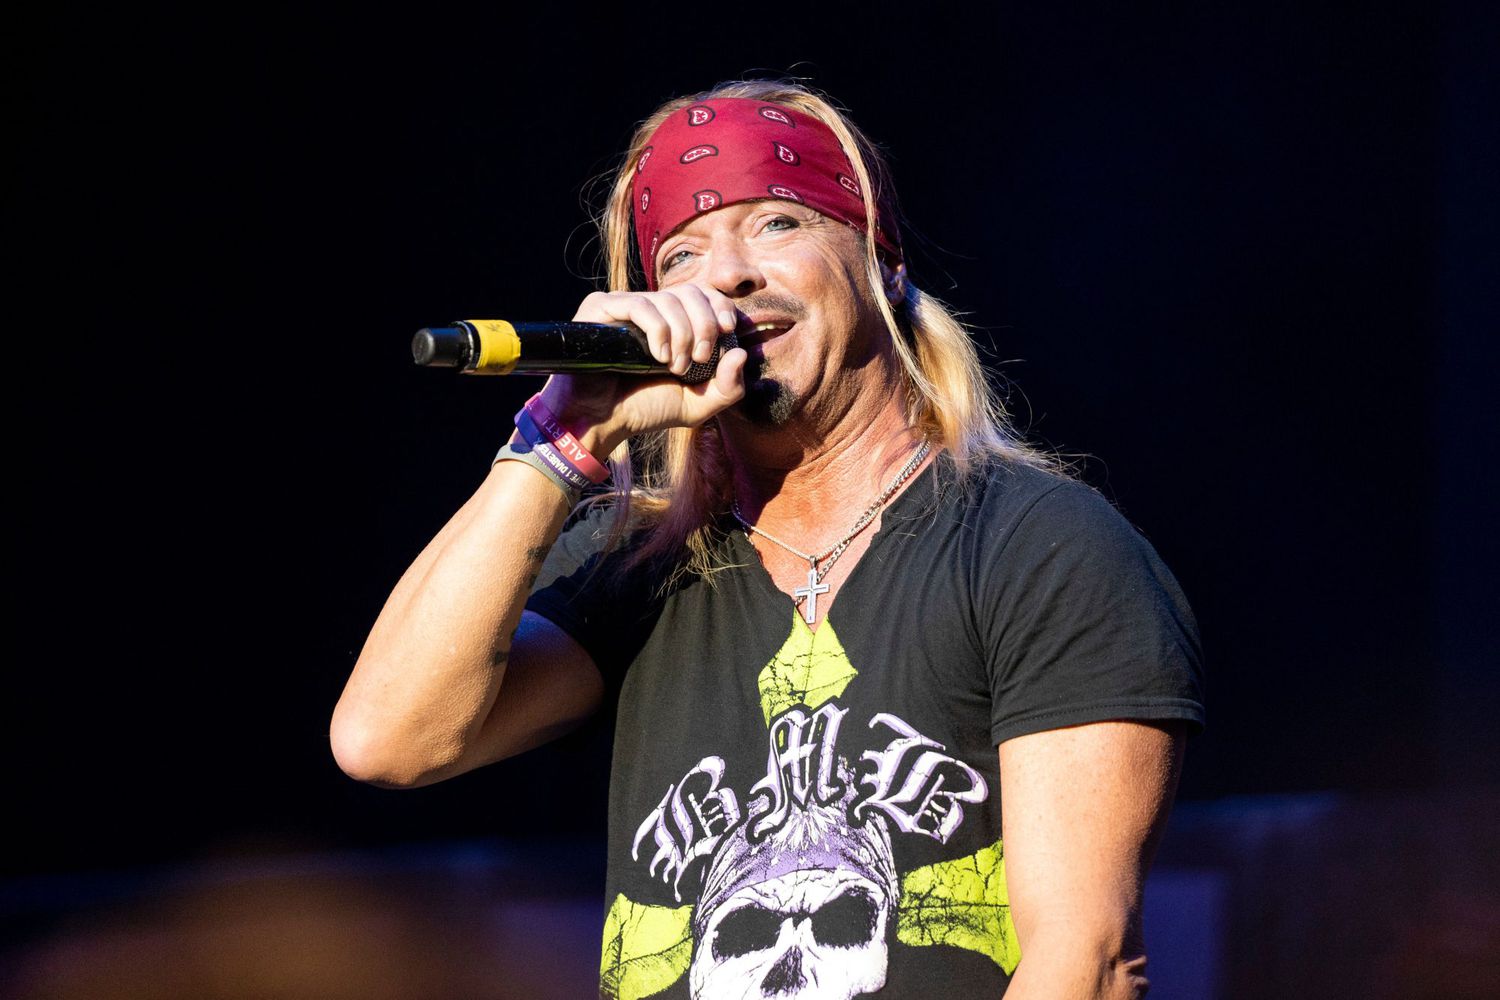 Bret Michaels 'Gives 100%' in Return to Stage After Hospitalization: 'Sick and in the Pouring Rain'